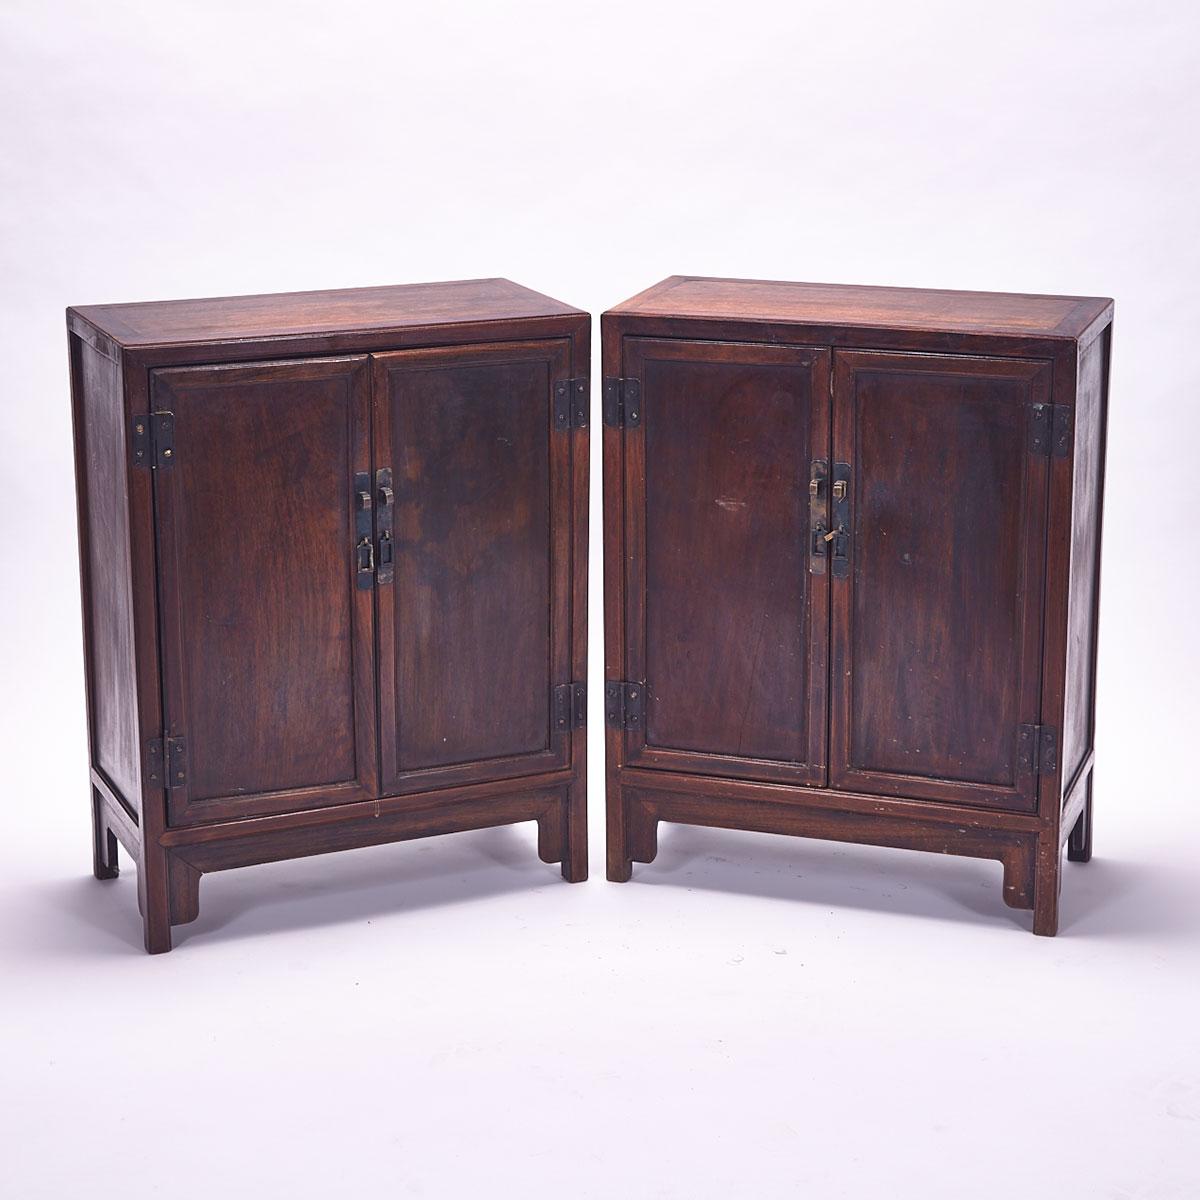 Pair of Huali Low Cabinets, Late Qing Dynasty